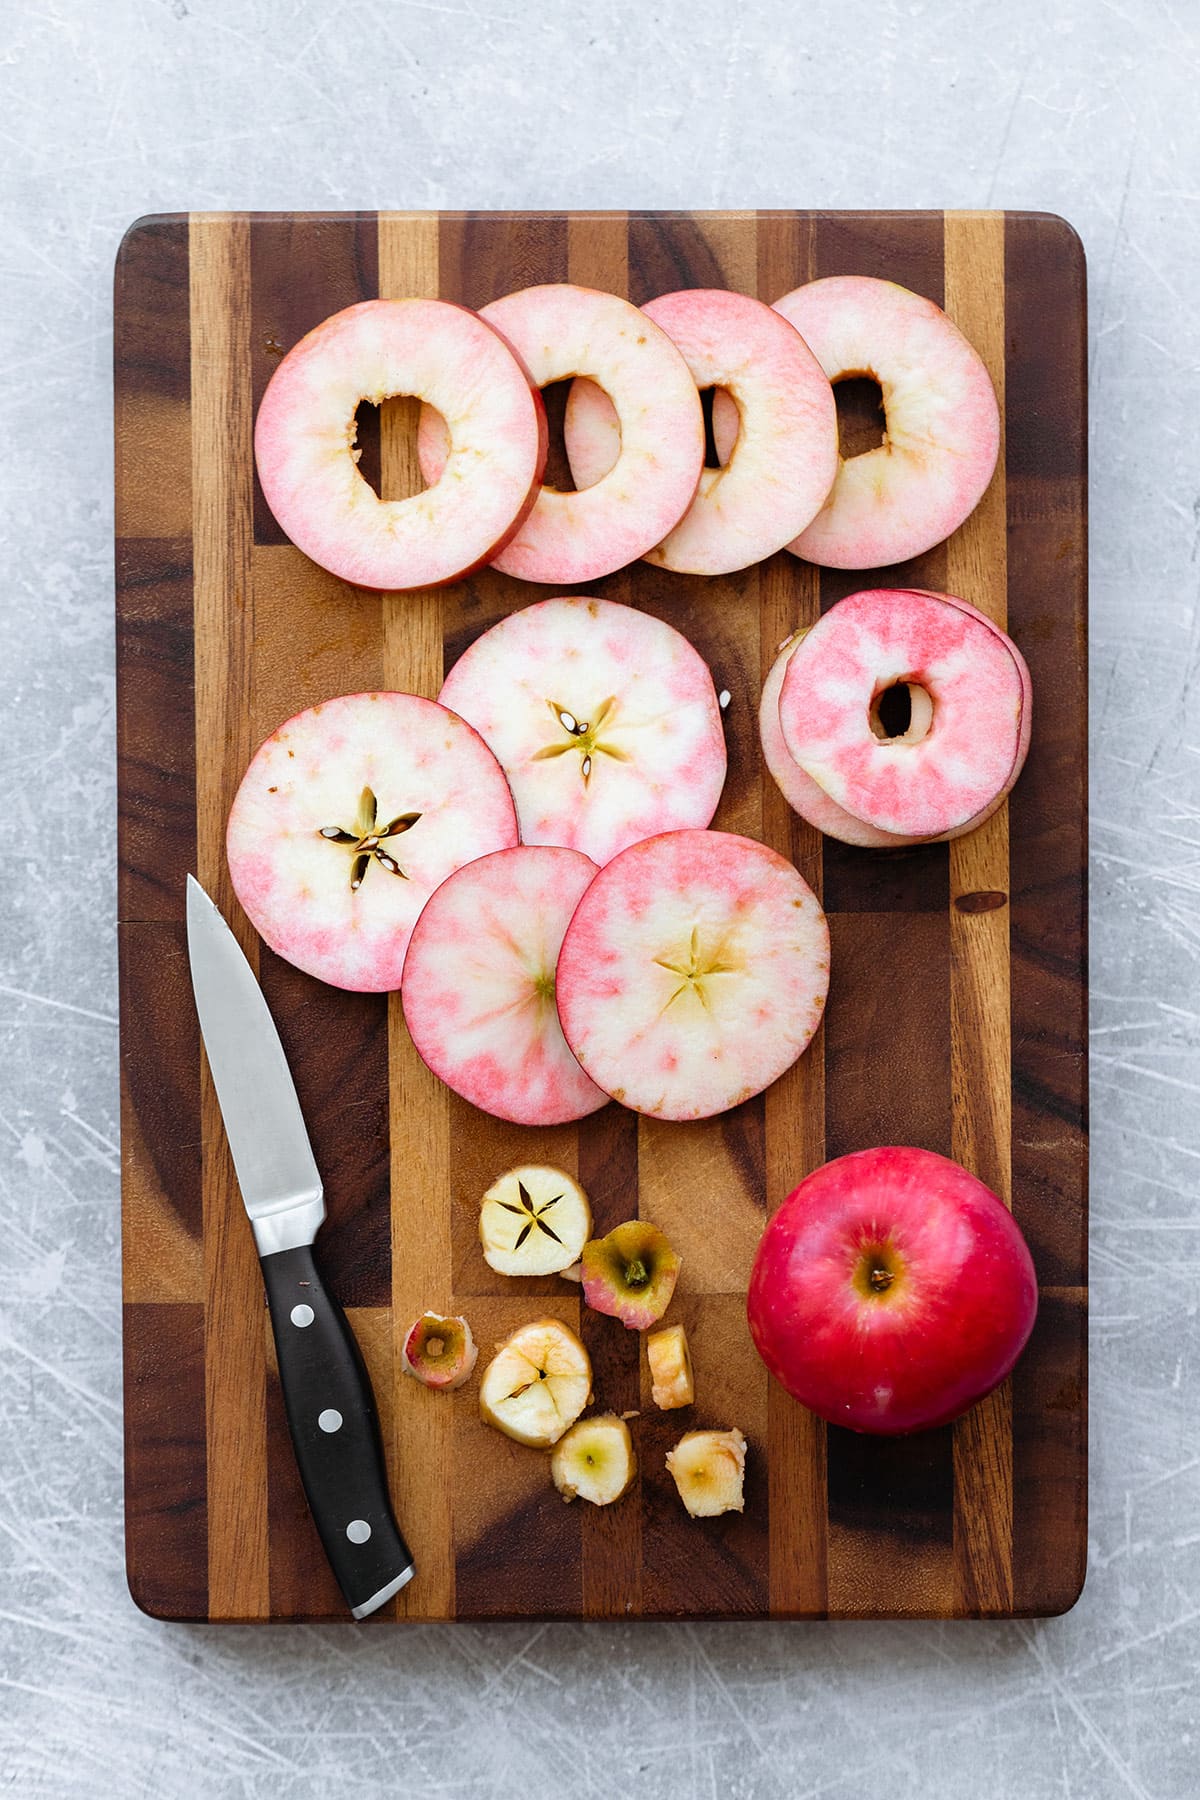 Red apple sliced into rings laid out on a wooden cutting board.